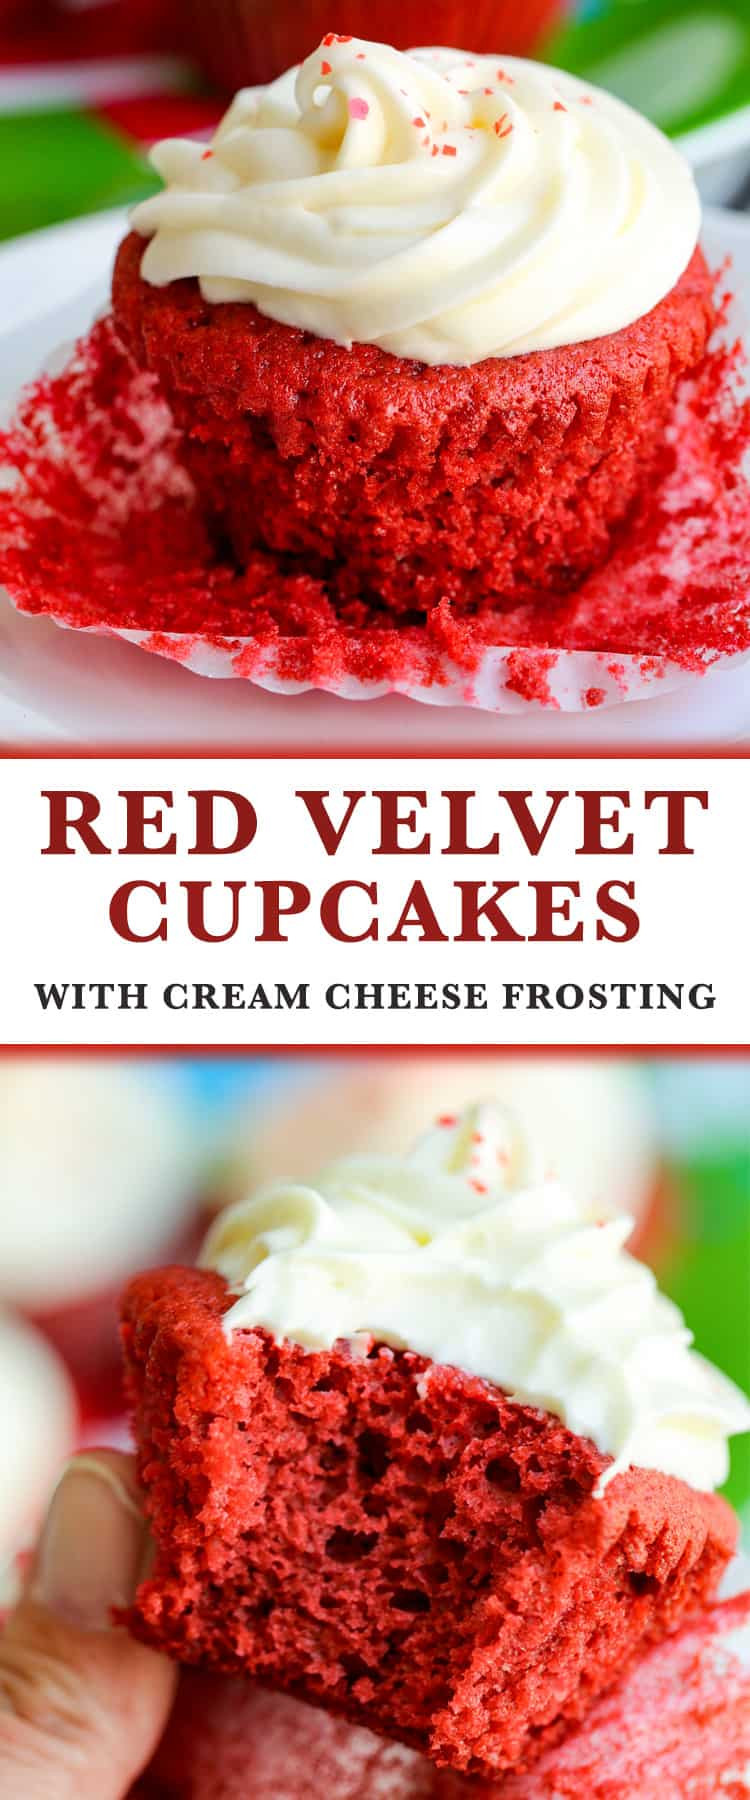 Red Velvet Cupcakes With Cream Cheese Frosting
 Red Velvet Cupcakes with Cream Cheese Frosting